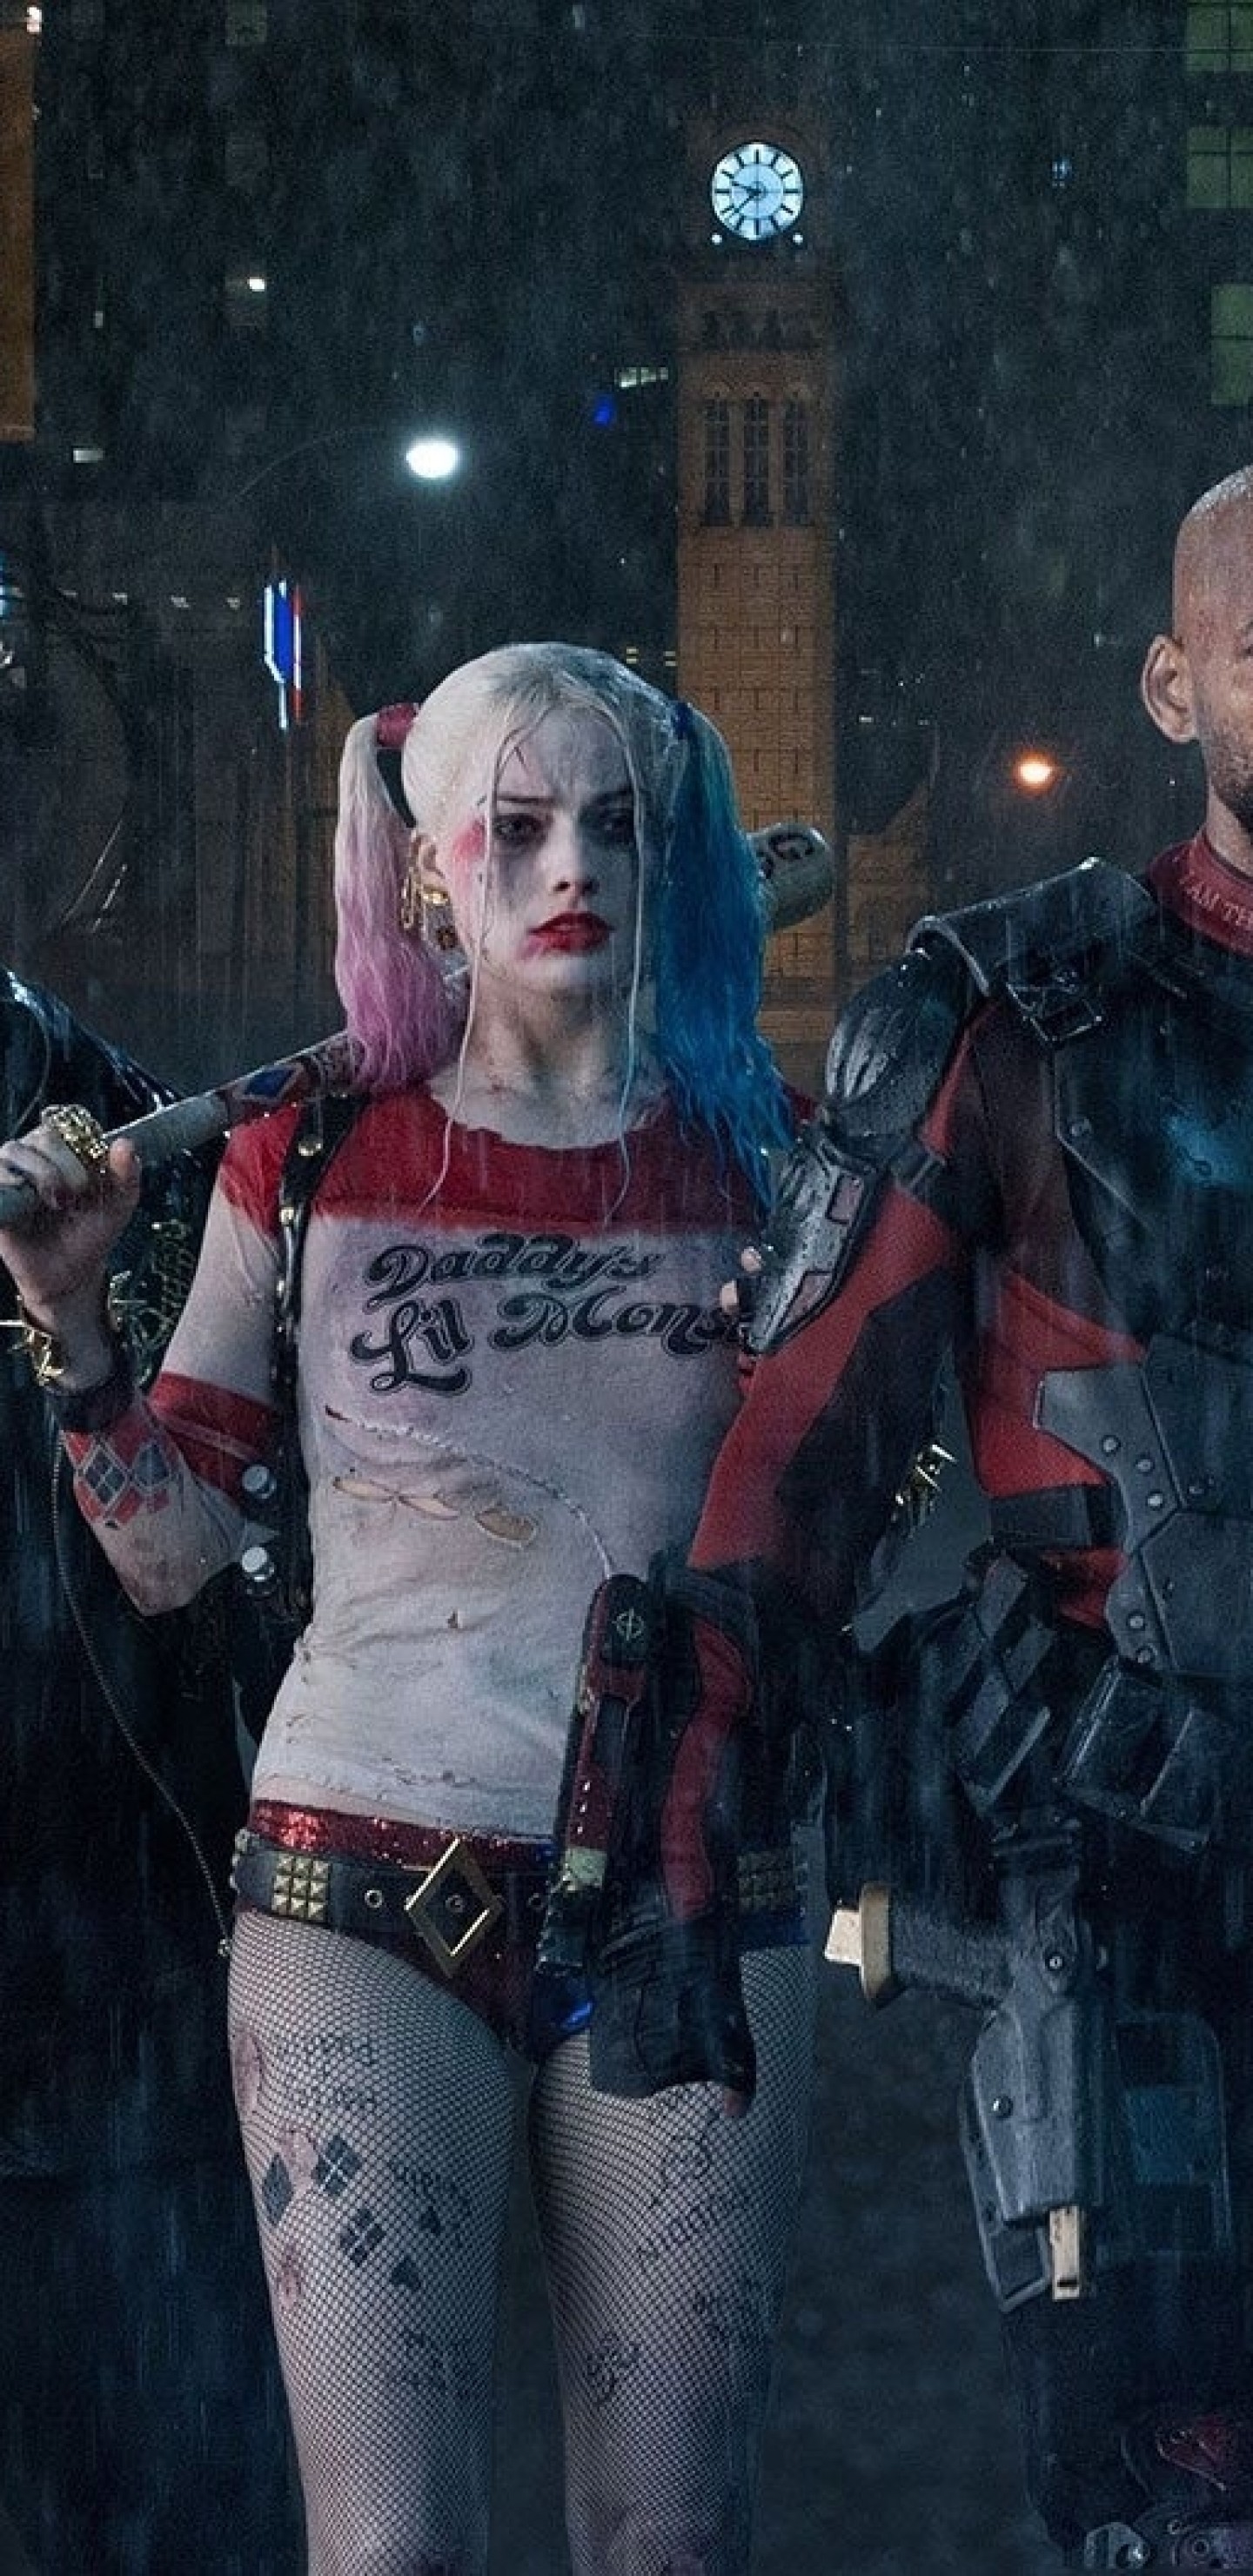 Suicide Squad, Harley Quinn, Will Smith, Margot Robbie, - Harley Quinn Margot Robbie Sad - HD Wallpaper 